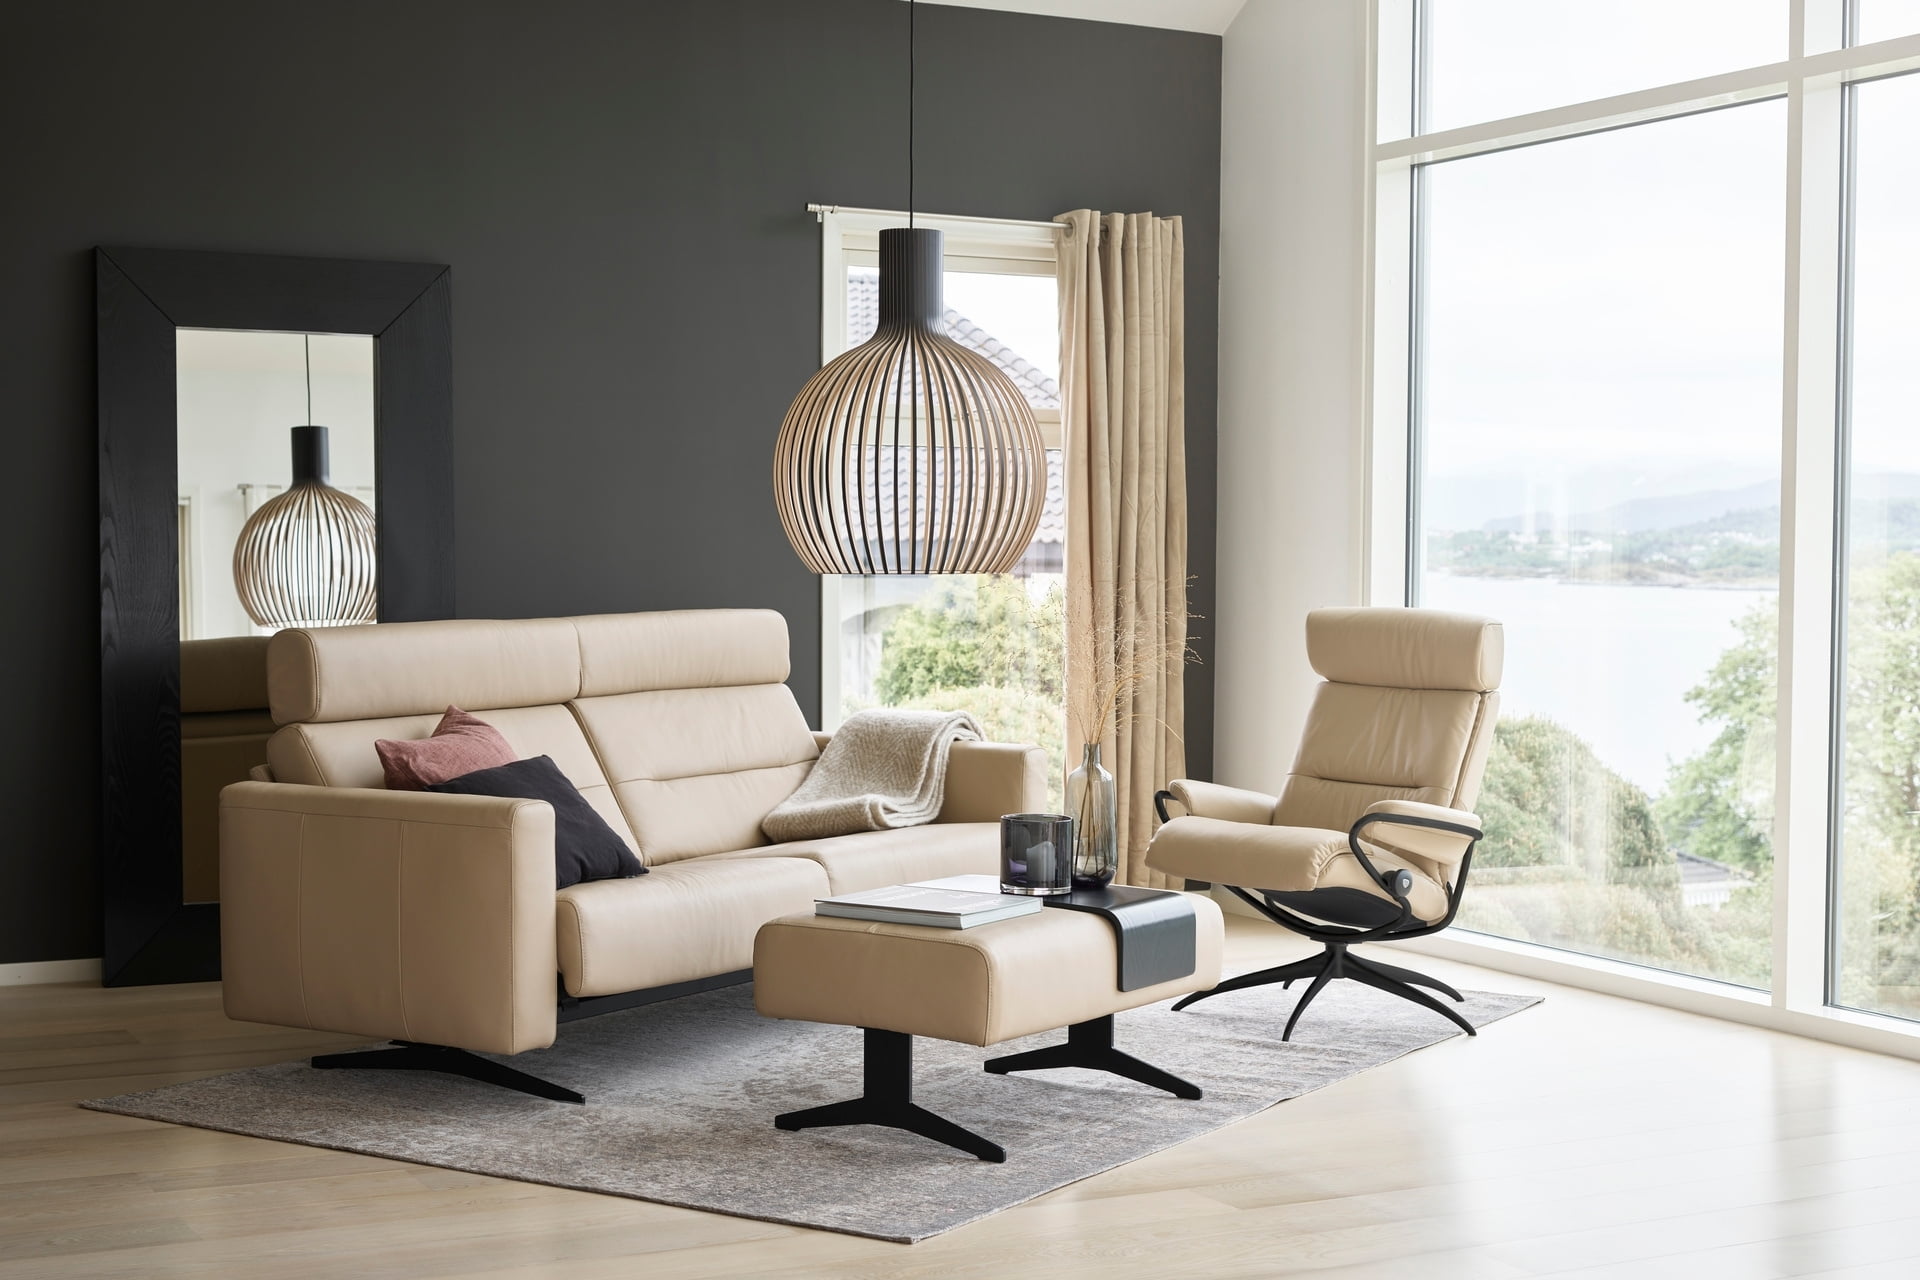 Stressless Stella 2,5+Seater with Headrest in Paloma Beige leather and Black Legs Ottoman, with Tokyo recliner Low with Headrest in Paloma Beige and Black Legs